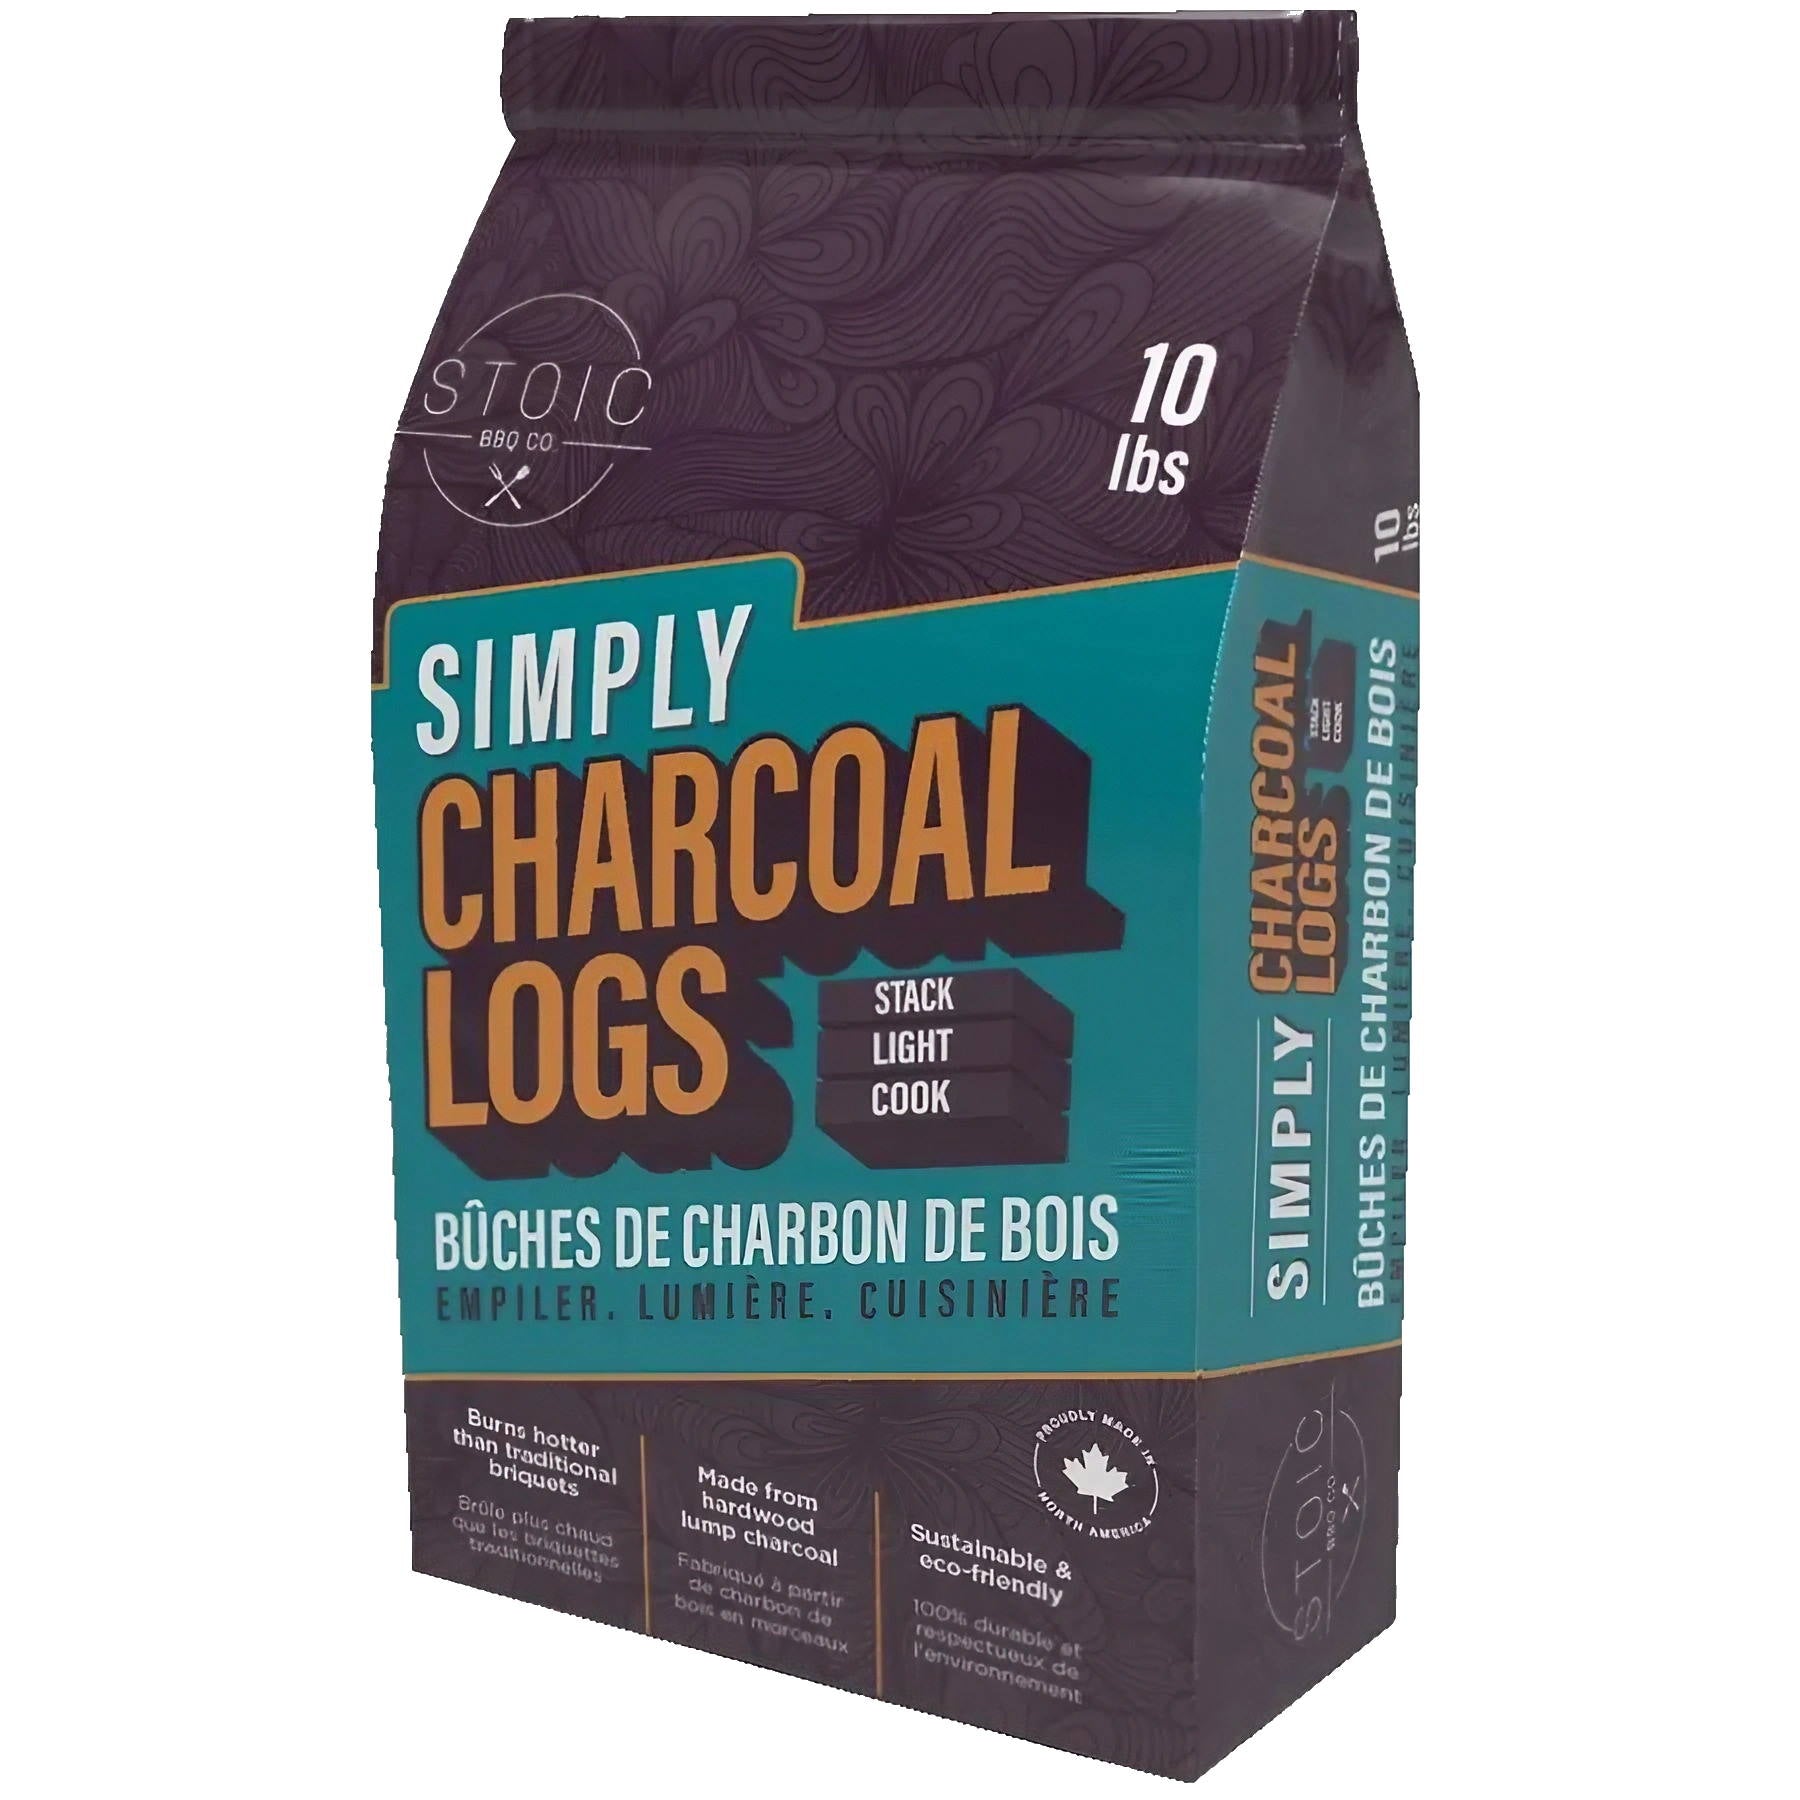 Stoic - Simply Charcoal Logs - 10 lbs